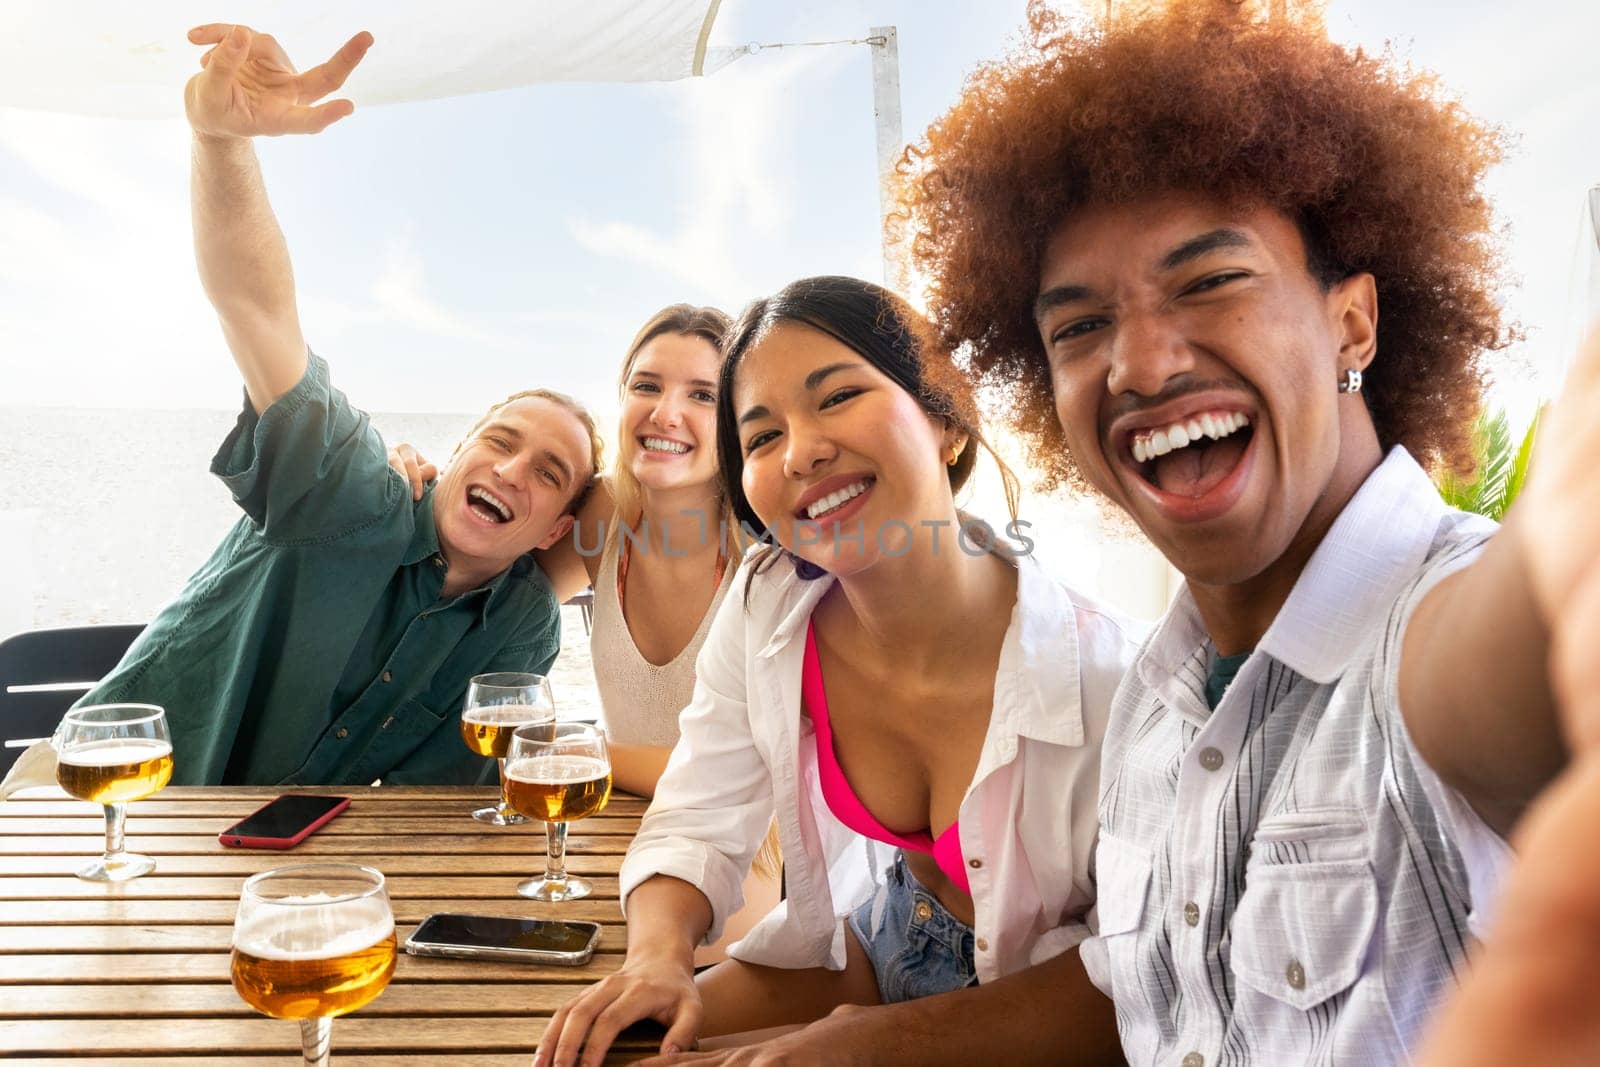 African American young man taking selfie with multiracial friends at a beach bar celebrating summer together with beer. Lifestyle and summertime concept.